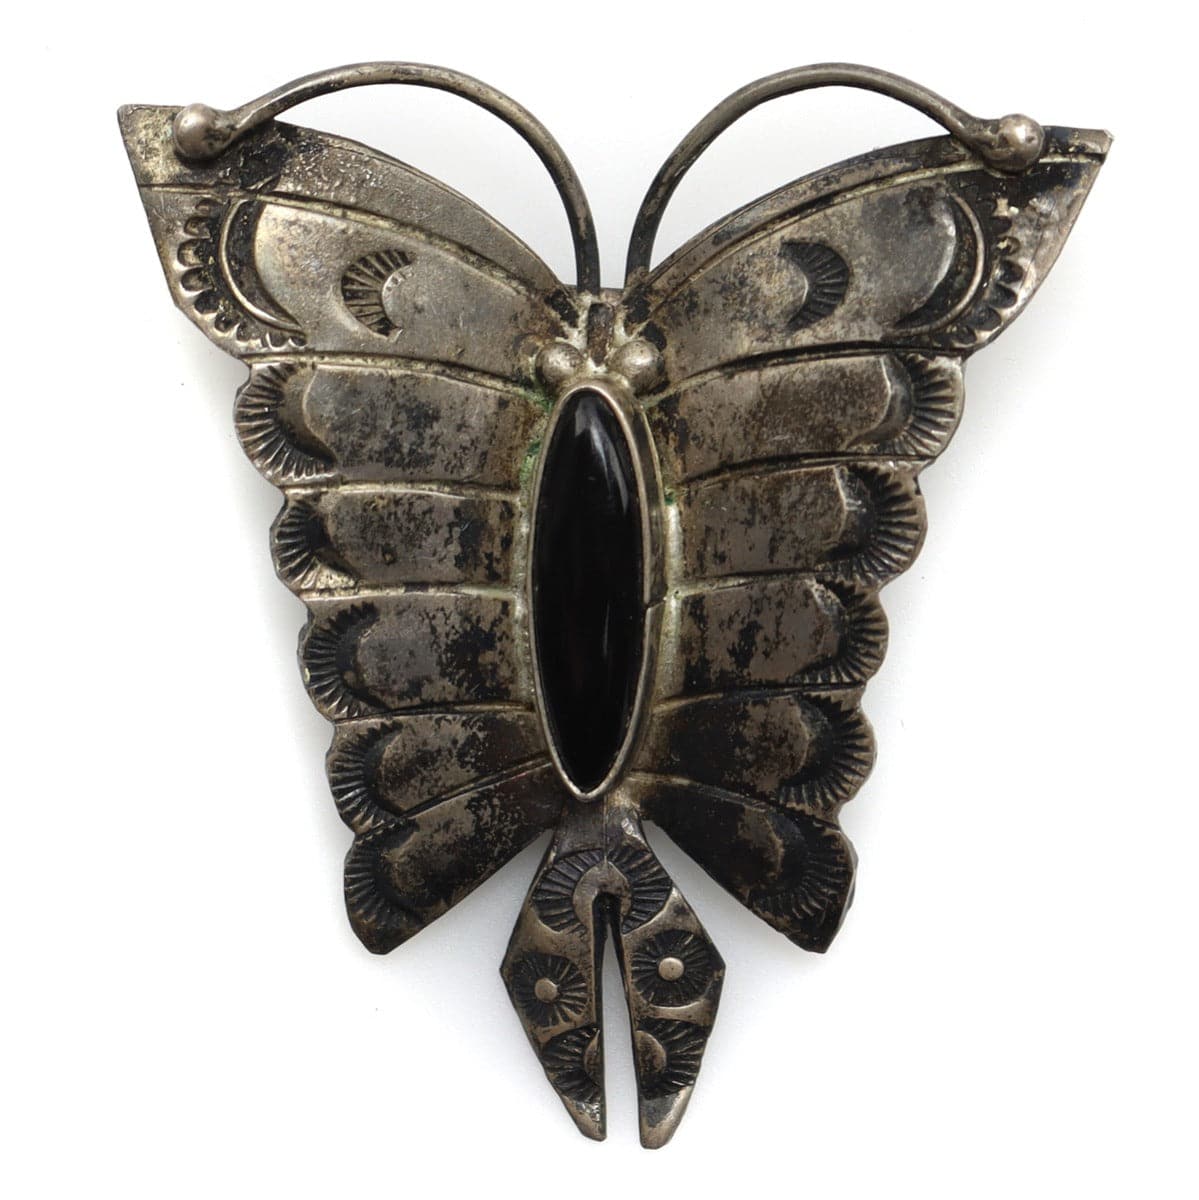 Navajo Onyx and Silver Butterfly Pin with Stamped Design c. 1930-40s, 1.75" x 1.625" (J13252)
